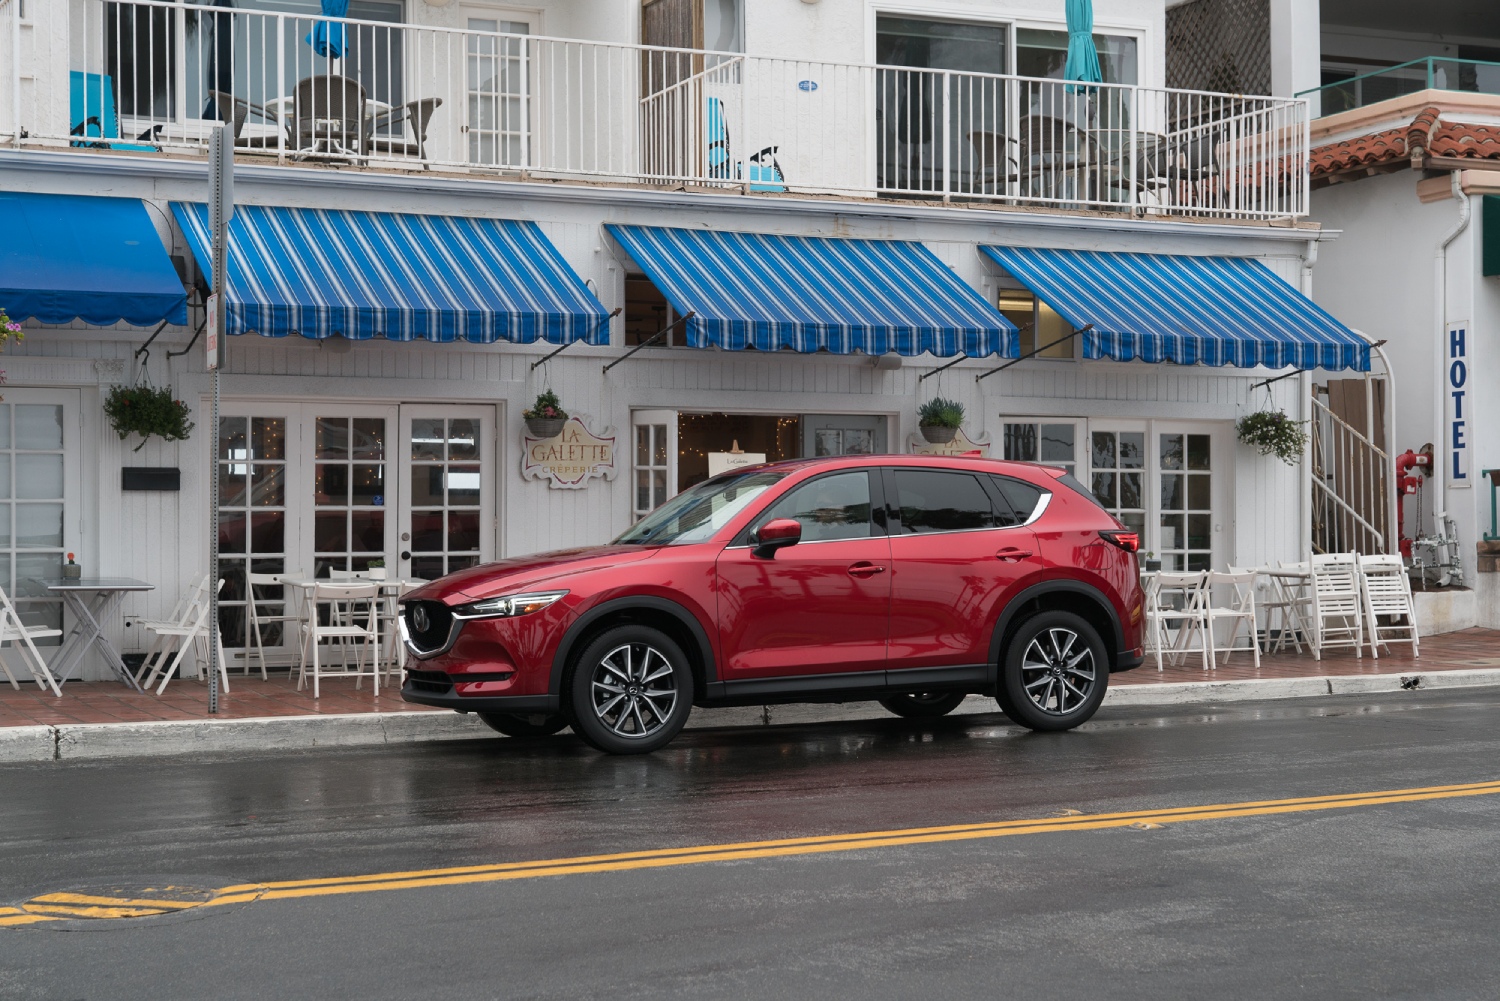 These reliable and safe SUVs like the Mazda CX-5 keep owners happy